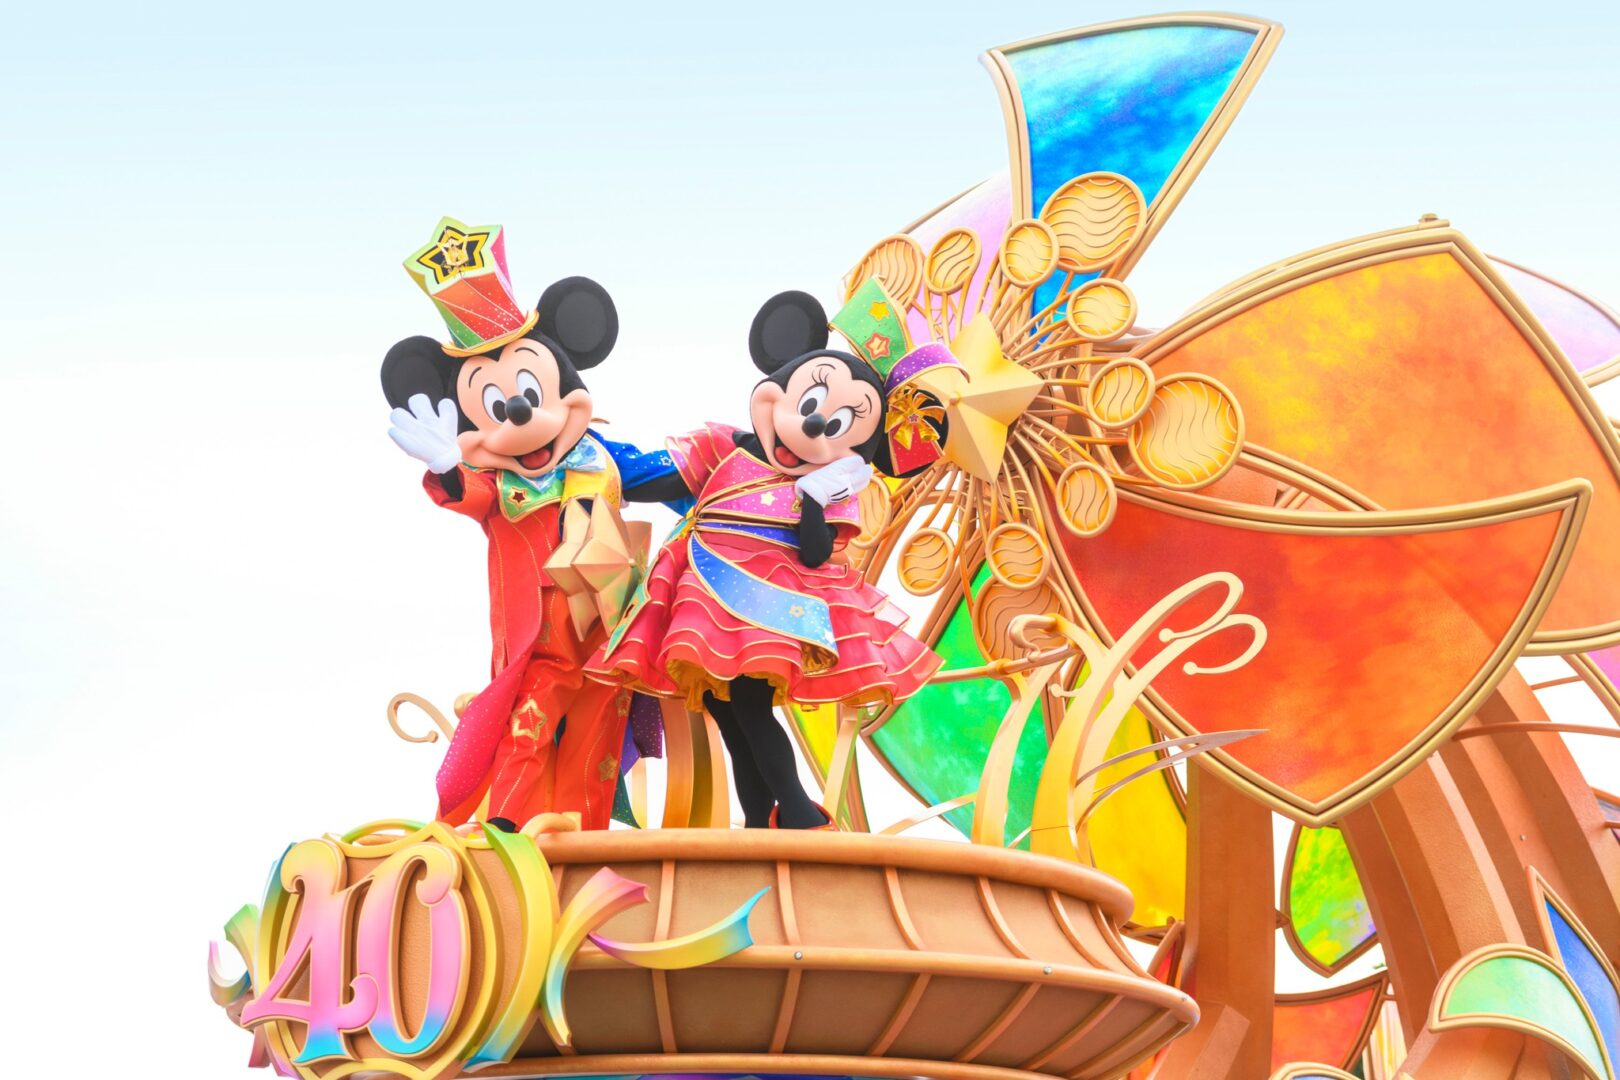 Disney Shares first look of the ALL-NEW “Disney Harmony in Color” Parade